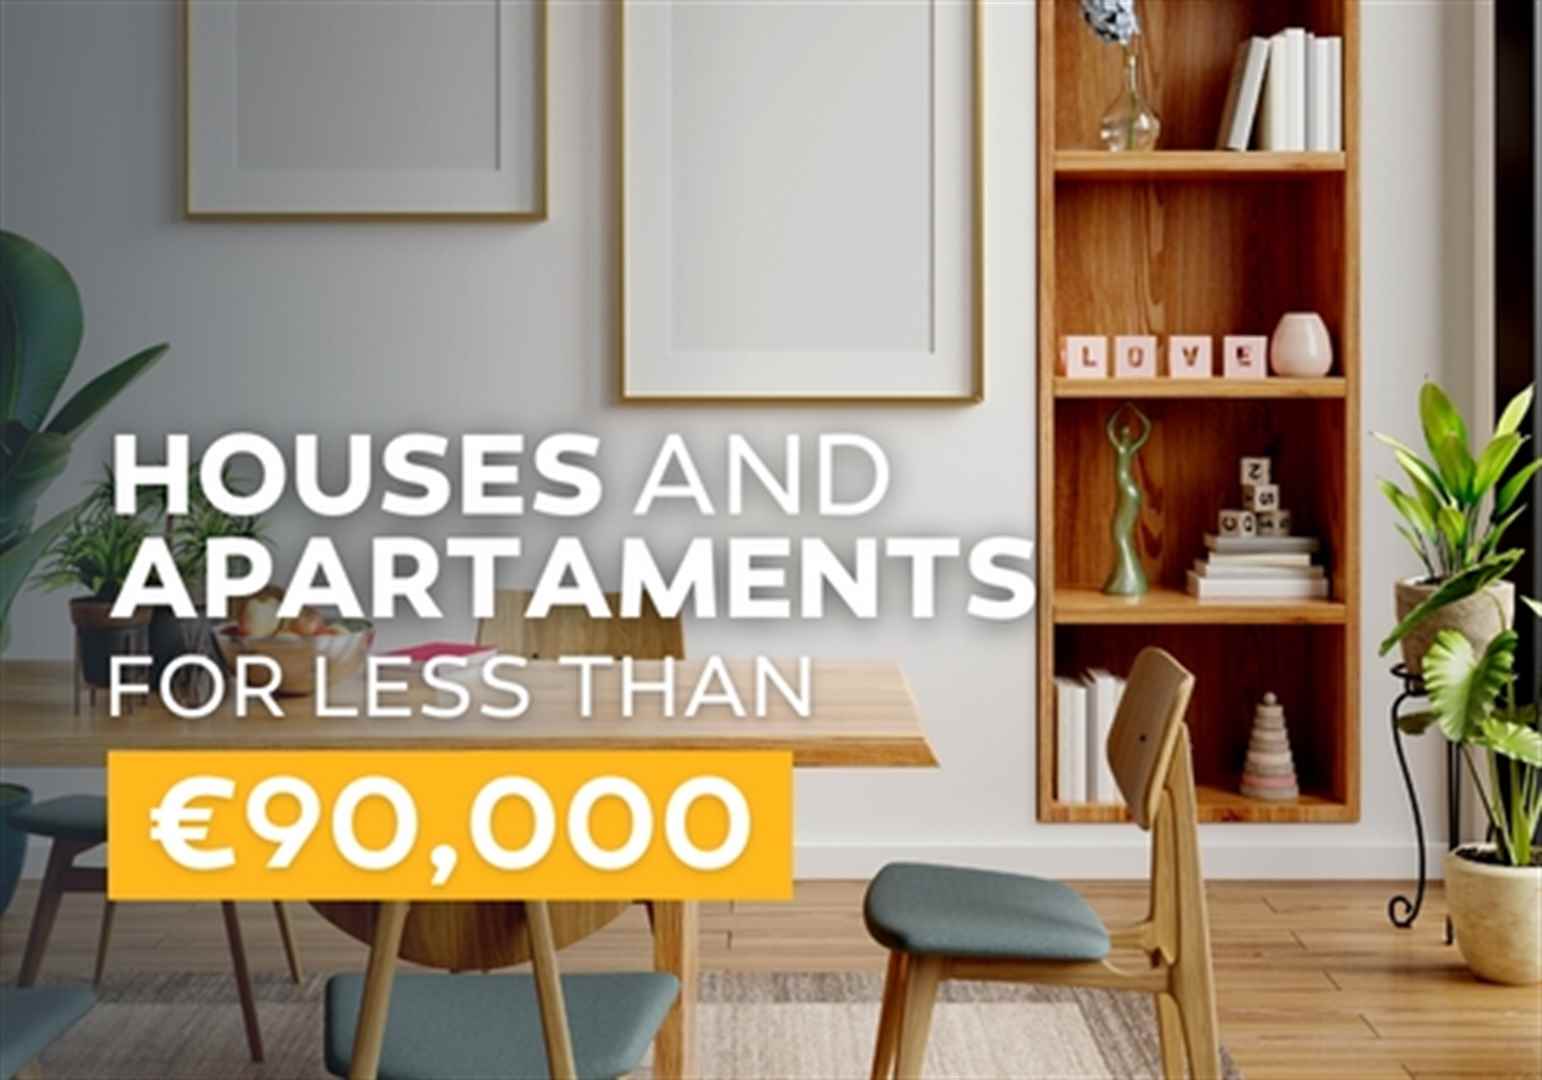 Houses and Apartaments for less than €90,000